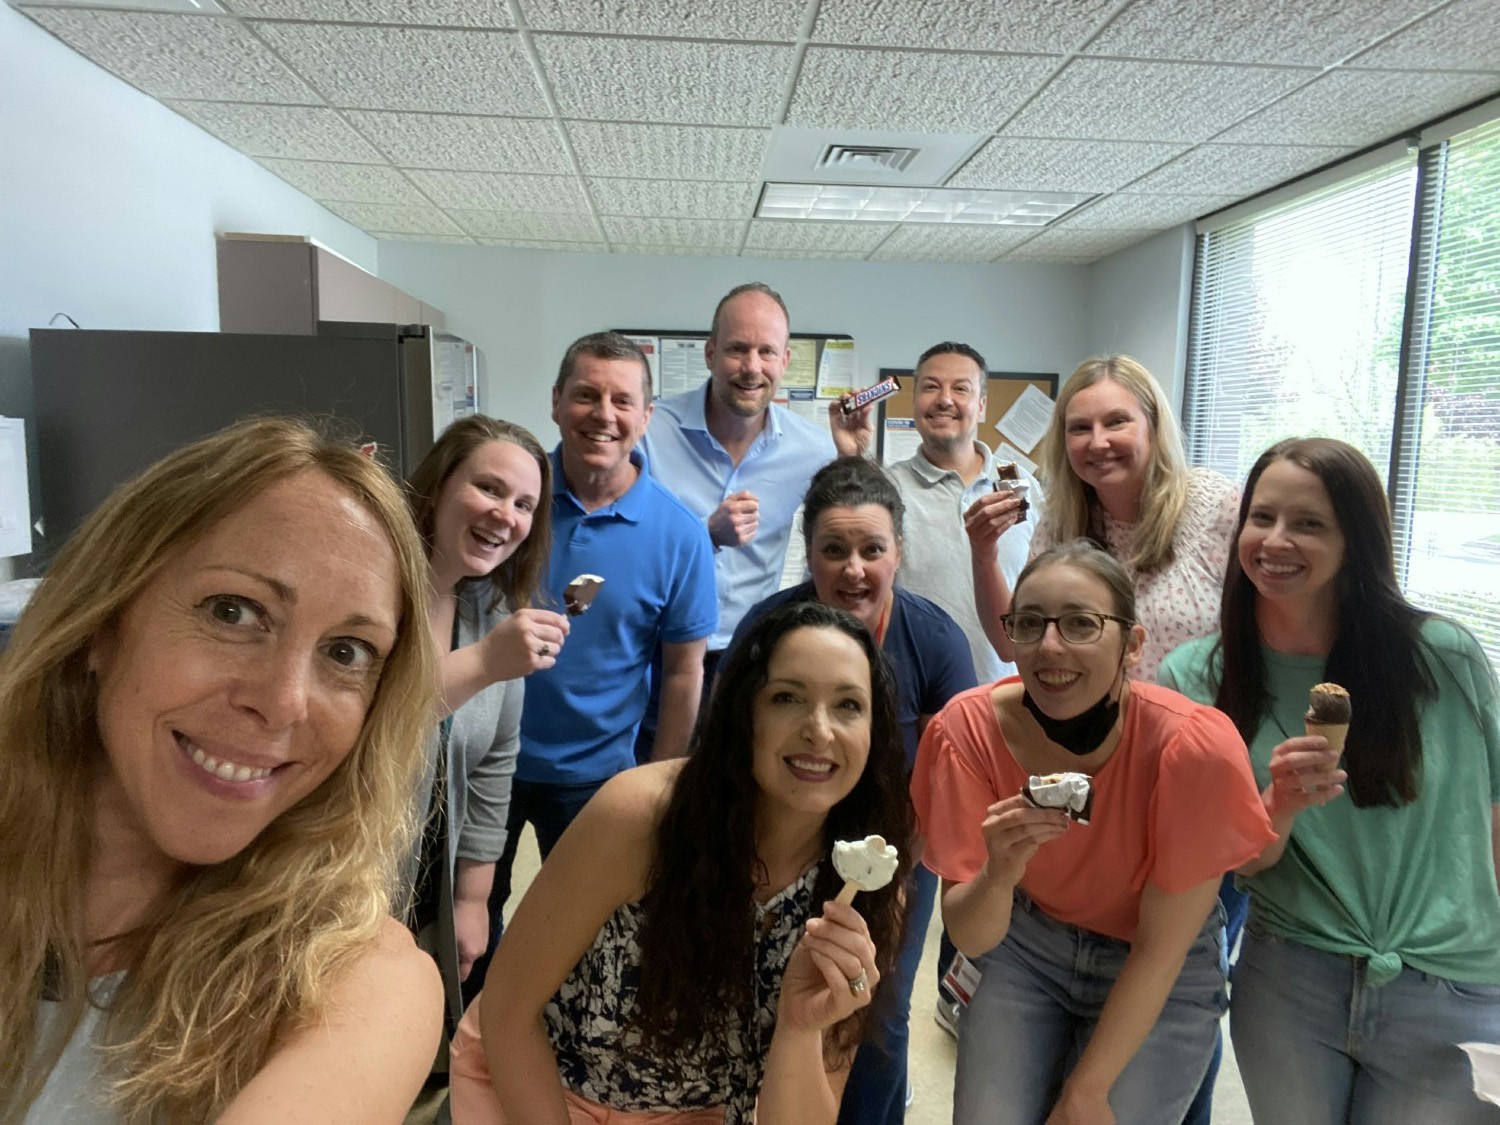 HR Works employees cool off with an ice cream day